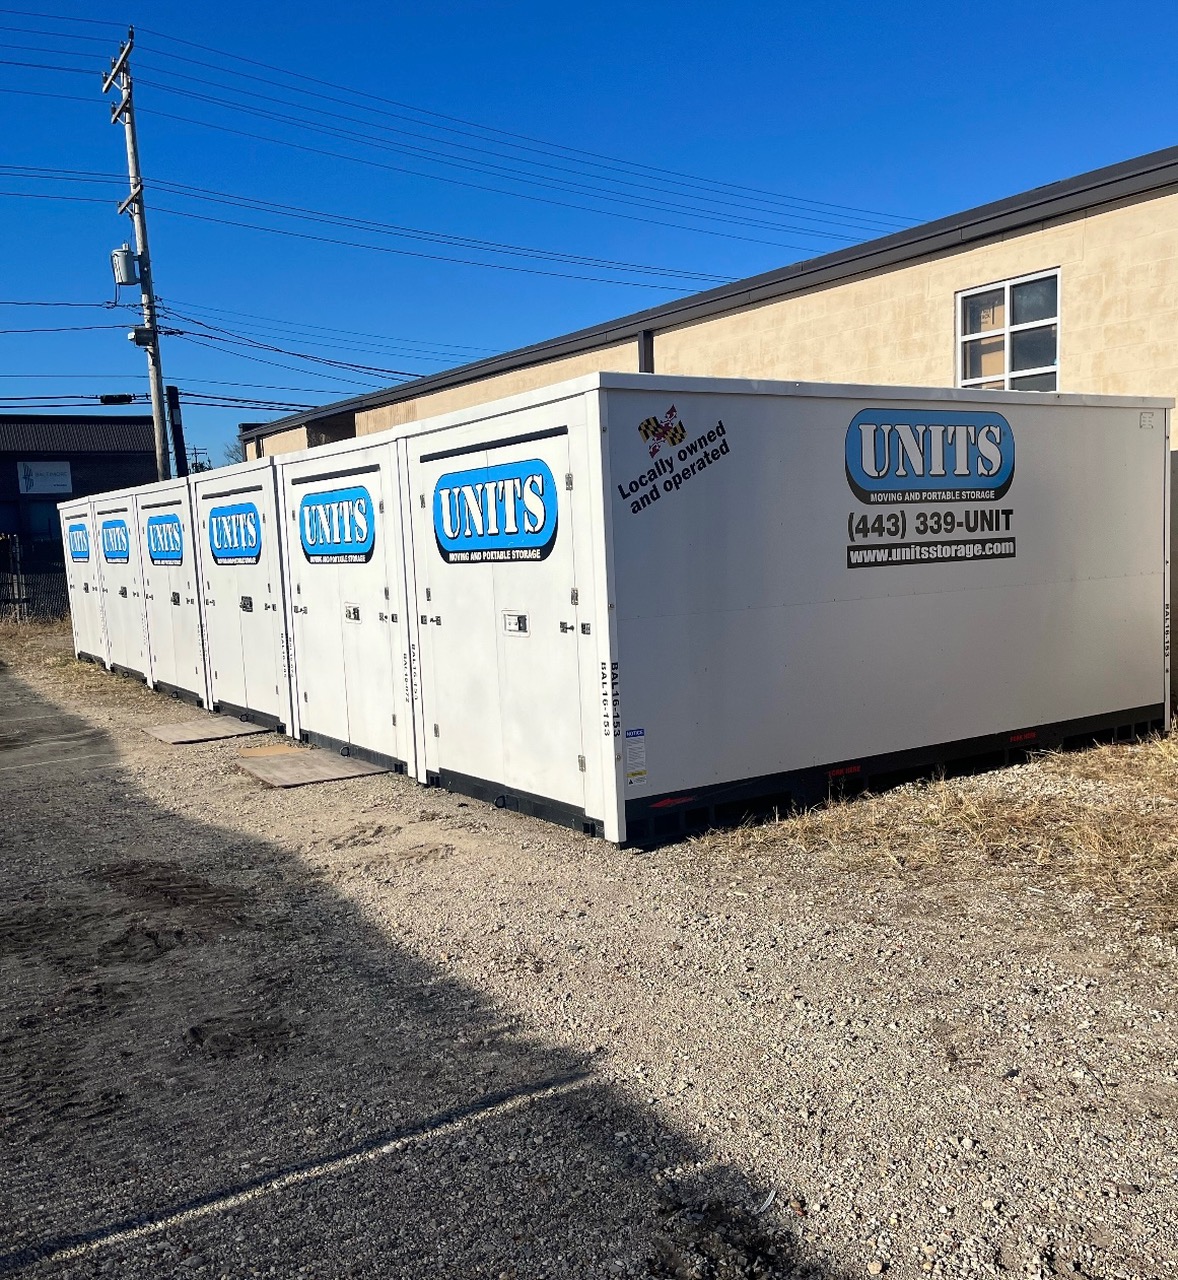 UNITS Portable Storage Containers in Baltimore Maryland